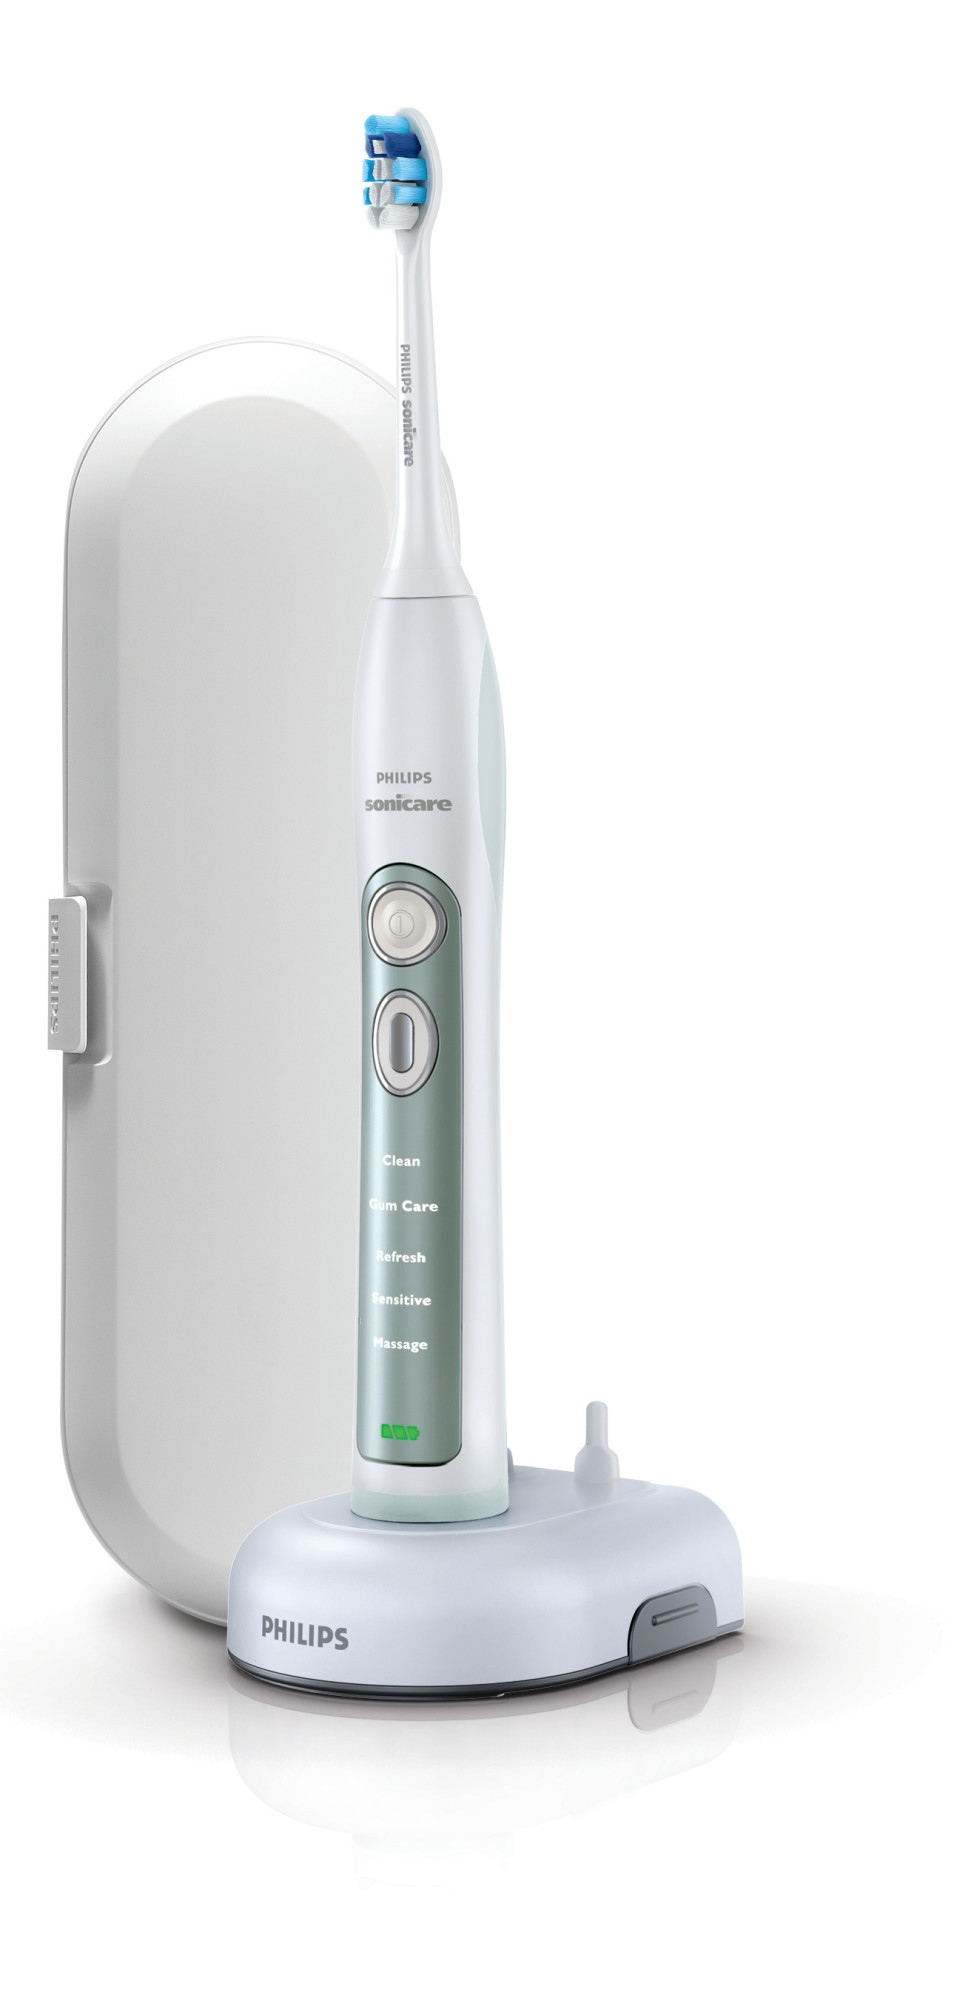 Philips Sonicare Flexcare+ Rechargeable Electric Toothbrush, Hx6921 - image 1 of 2